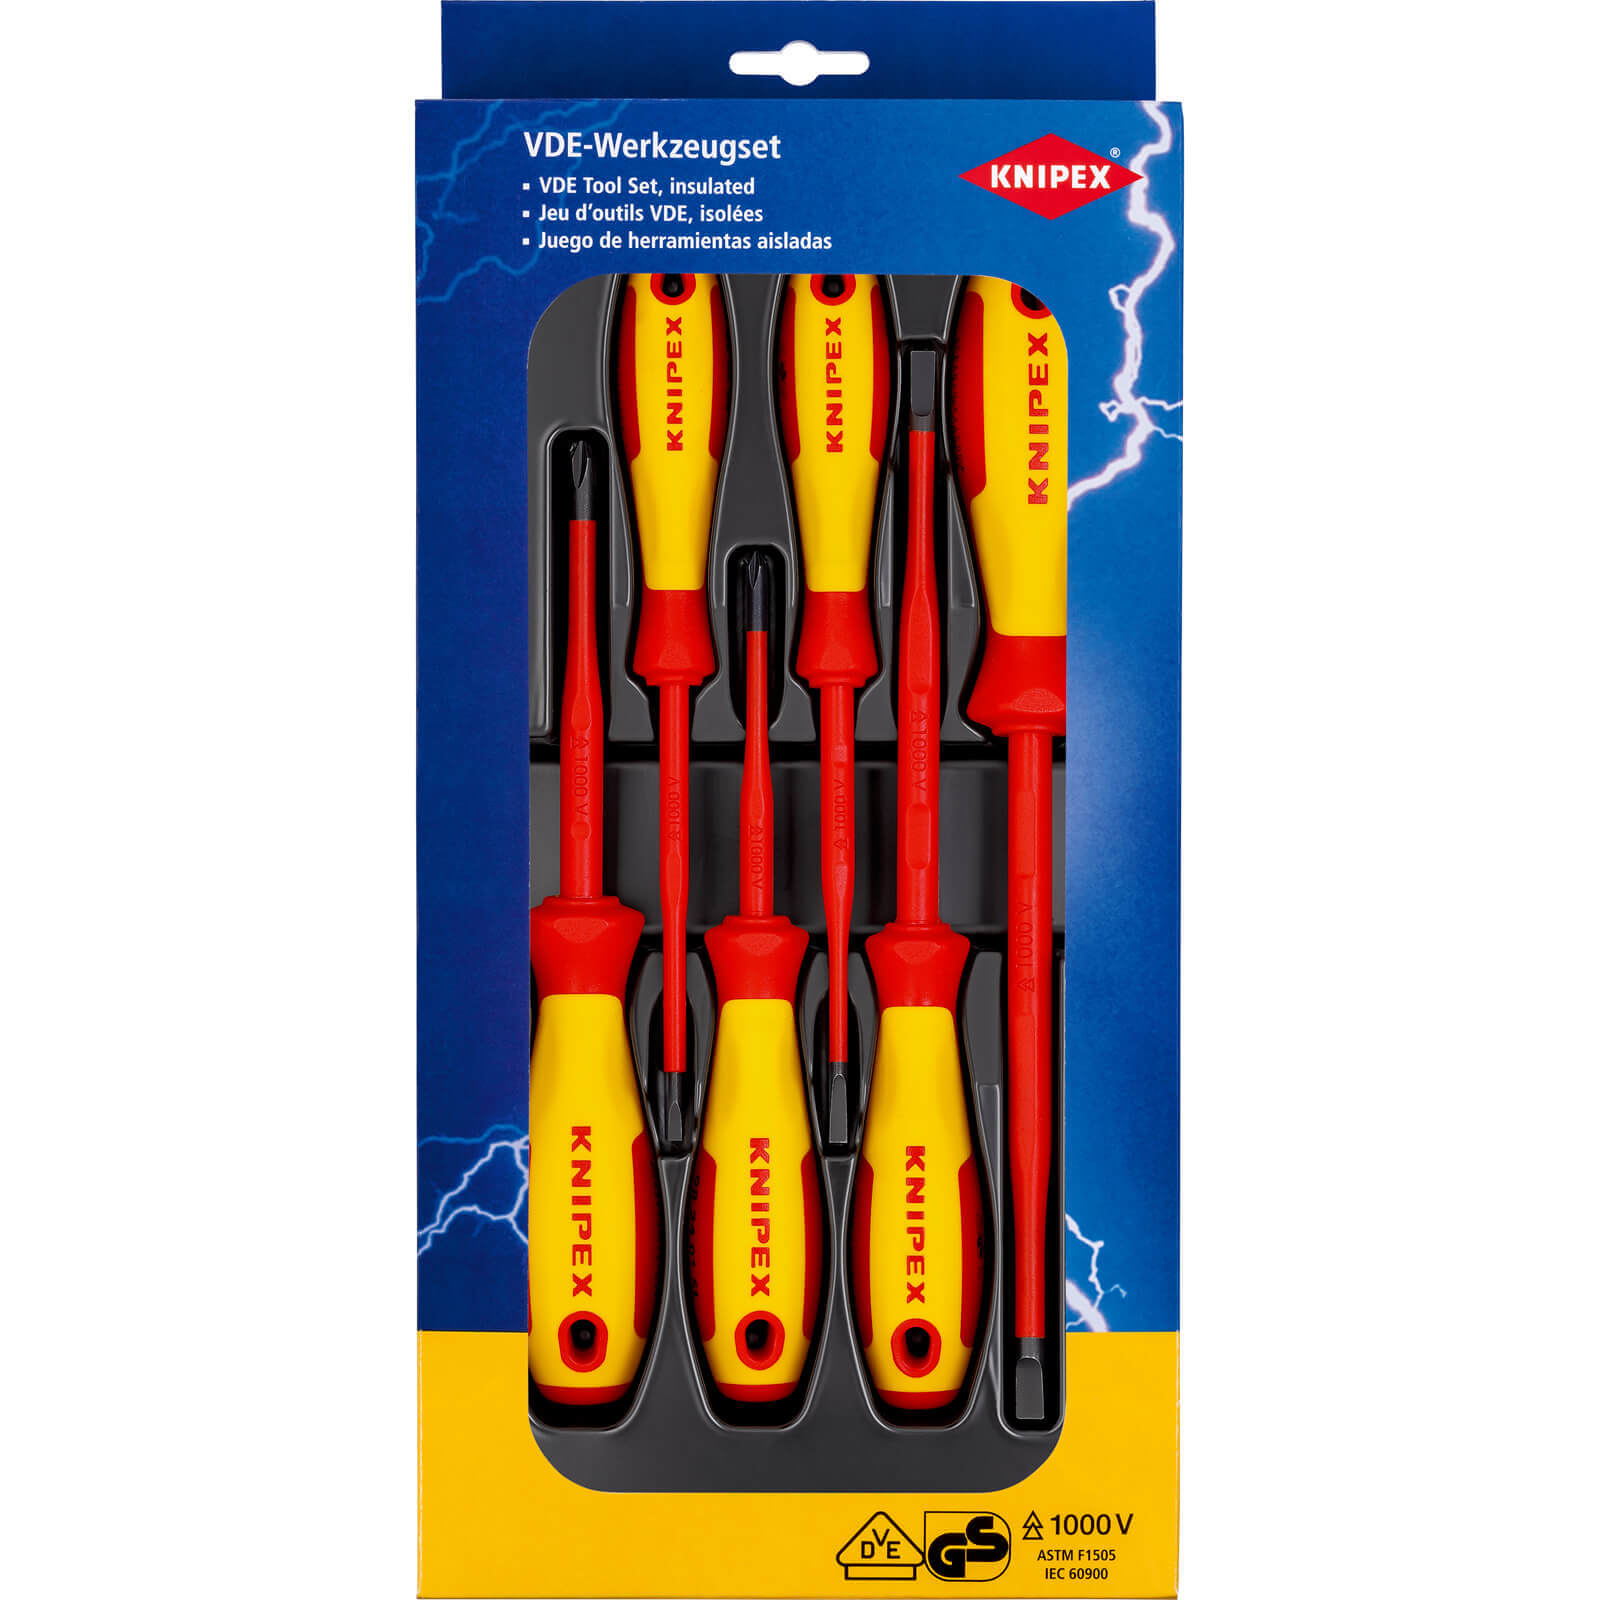 Photo of Knipex 6 Piece Vde Insulated Screwdriver Set